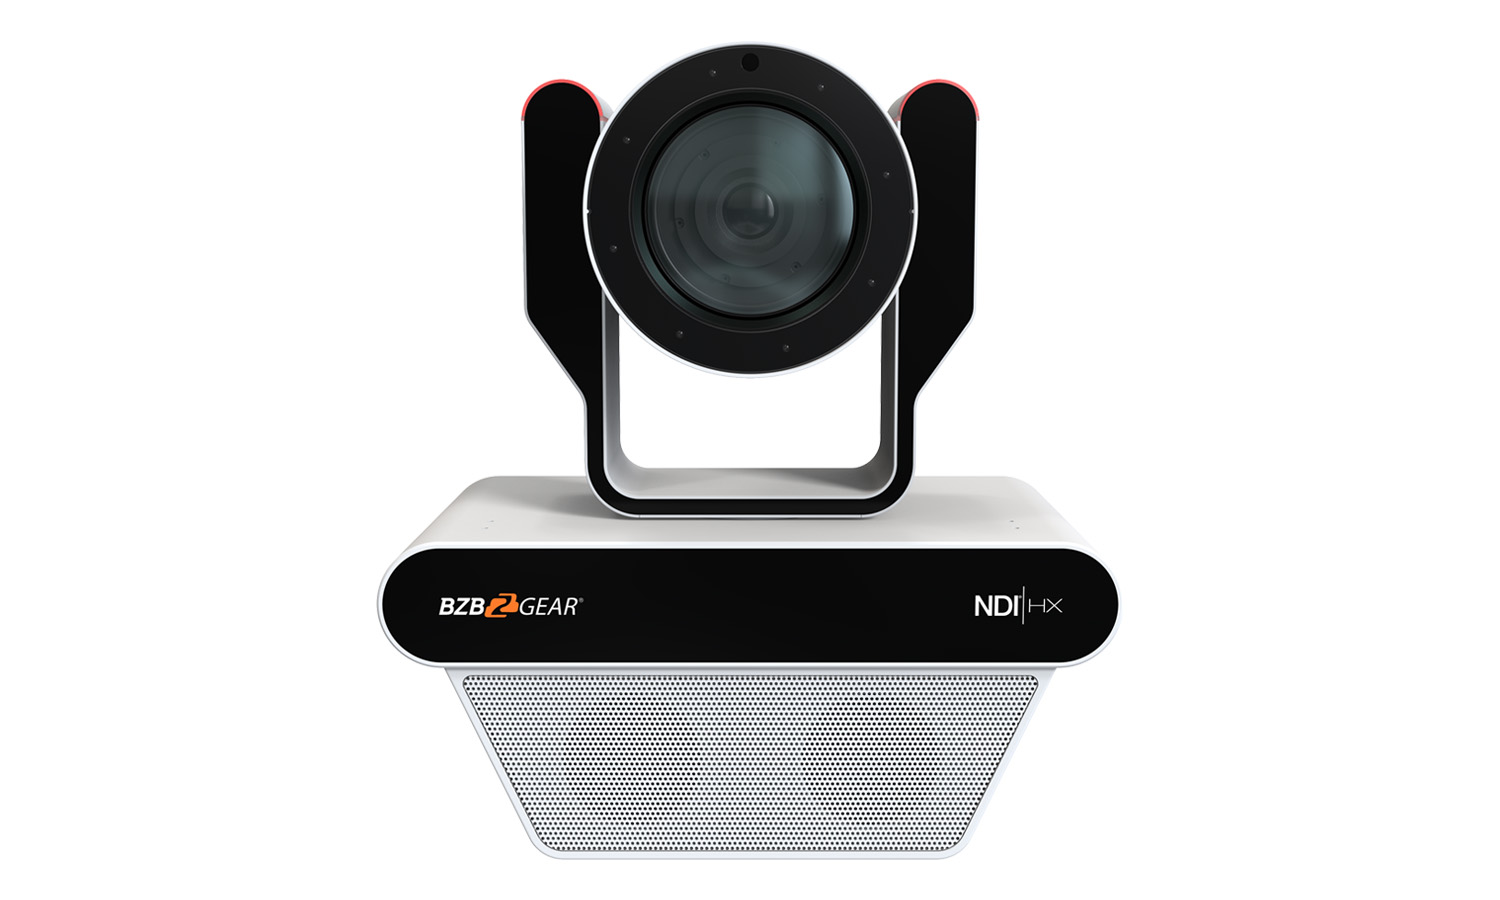 BG-NUTRIX Medical Grade Intelligent 4K UHD 30X NDI|HX PTZ Camera with Night Vision/Speakers/Microphone/Motion Detection (IEC 60601 Certified) by BZBGEAR